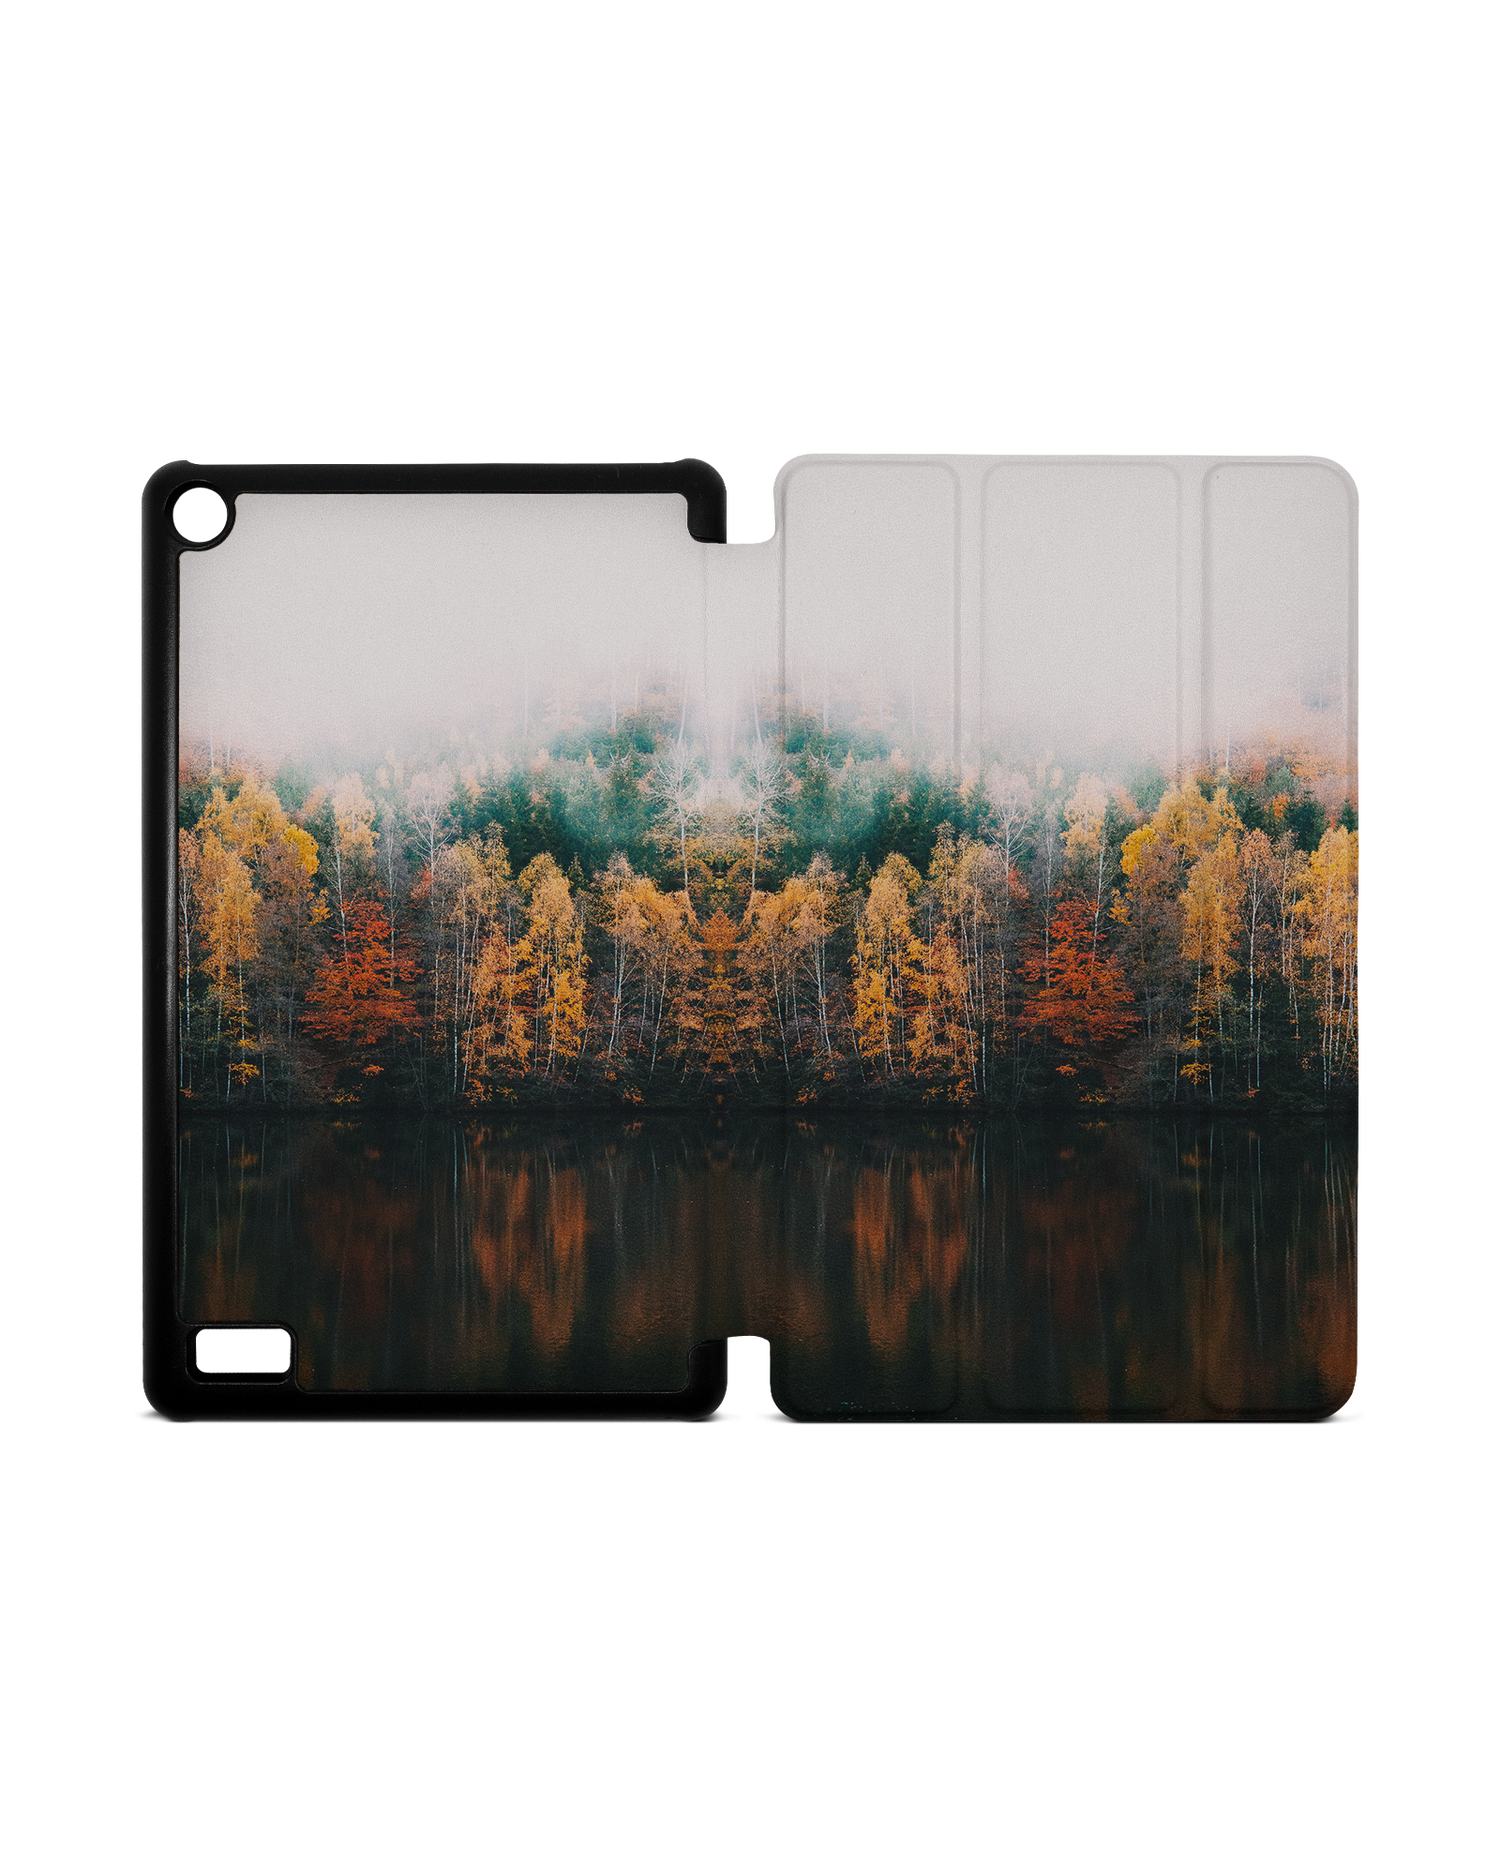 Fall Fog Tablet Smart Case for Amazon Fire 7: Opened